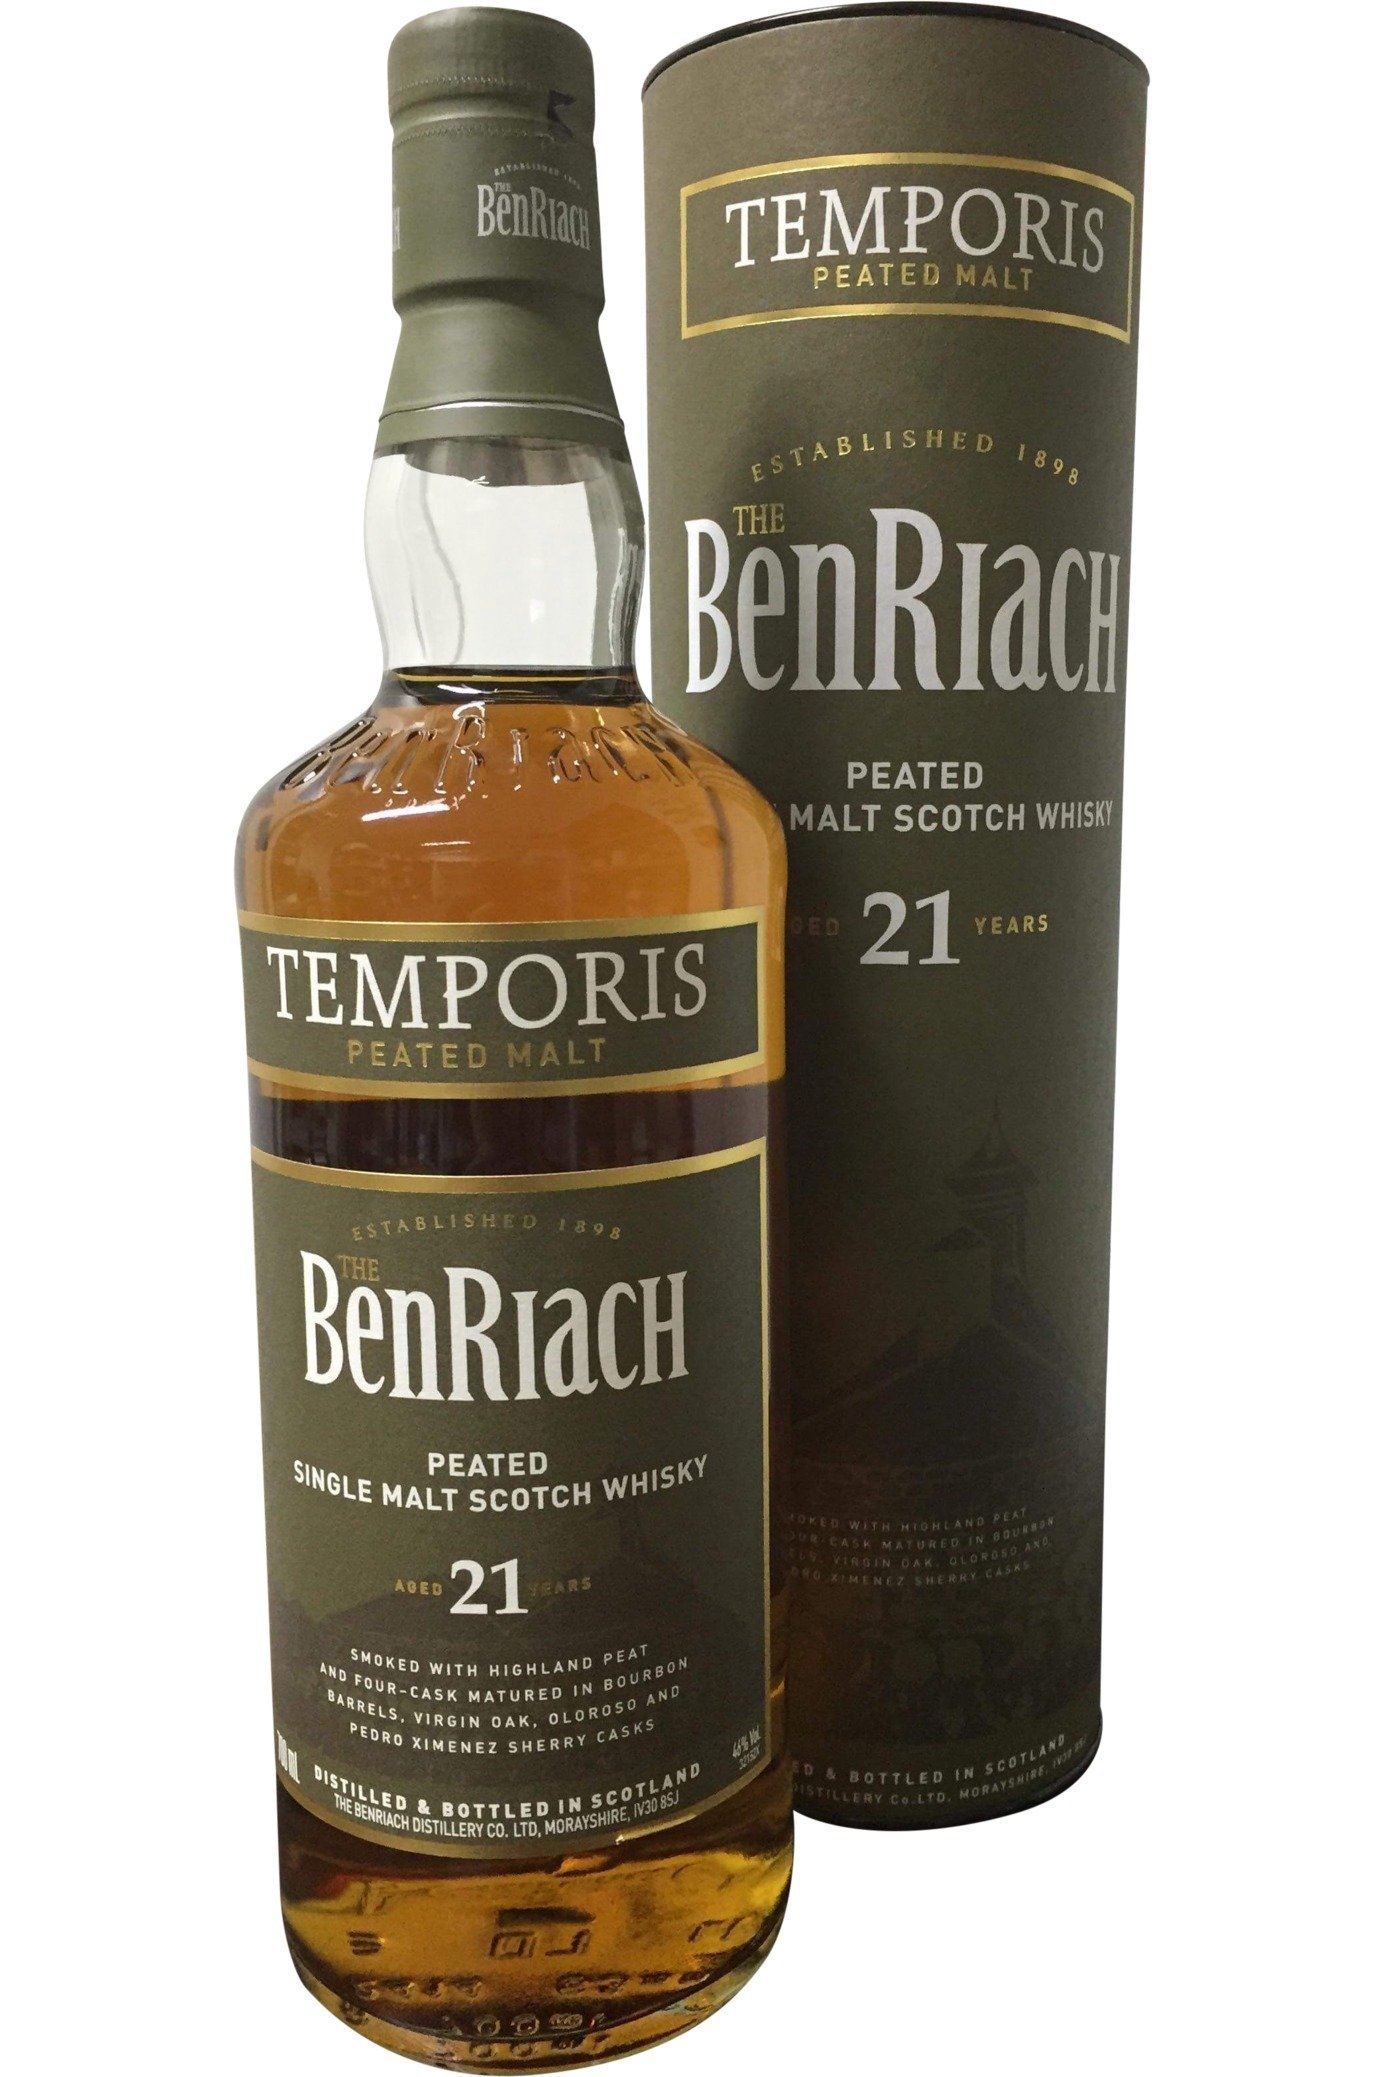 Benriach 21 Year Old Temporis Peated | 46% 700ml